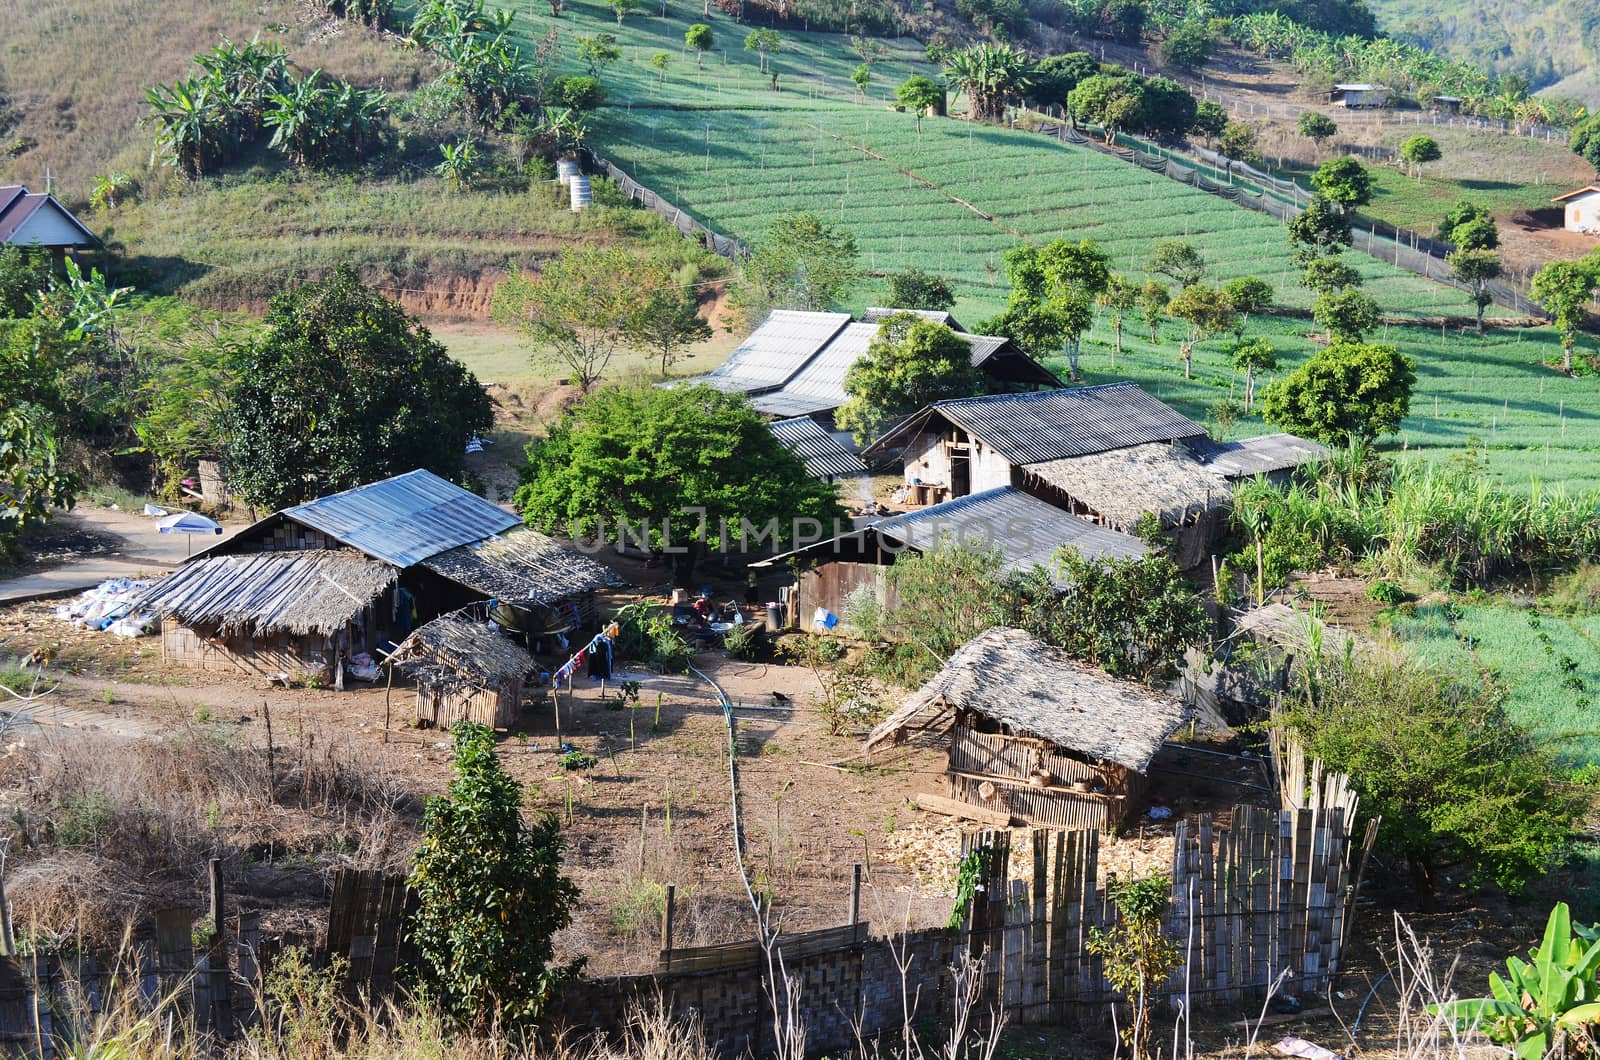 Country Village and Farm on Hillside  by kobfujar